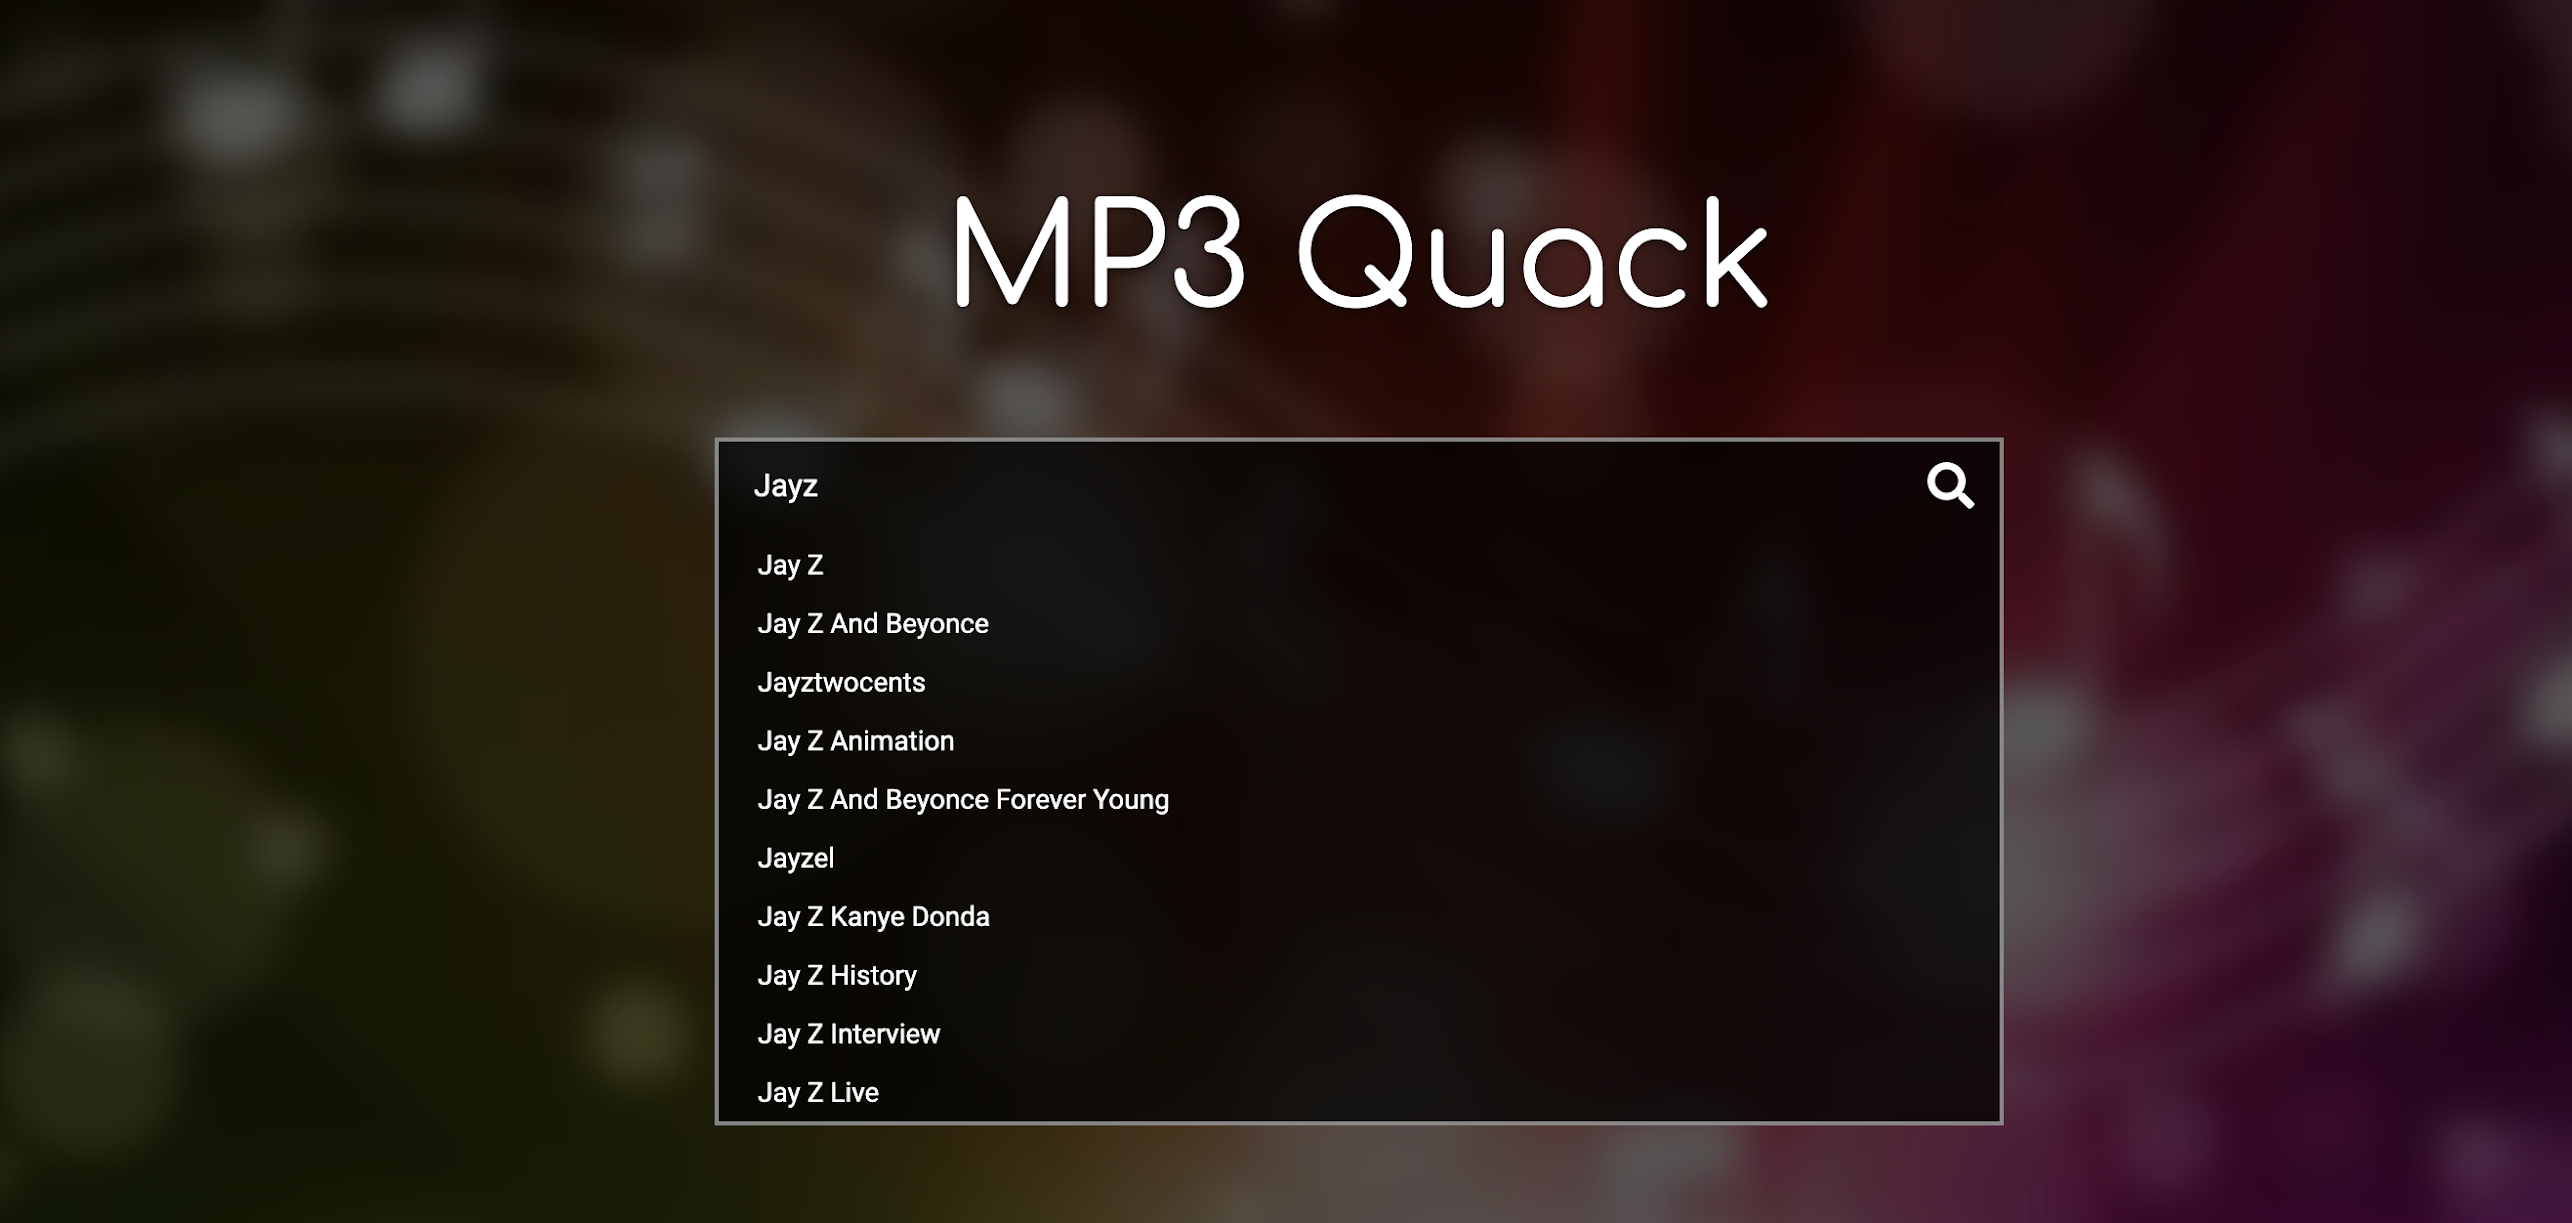 Free Music On Mp3 Quack Song Download Website And App